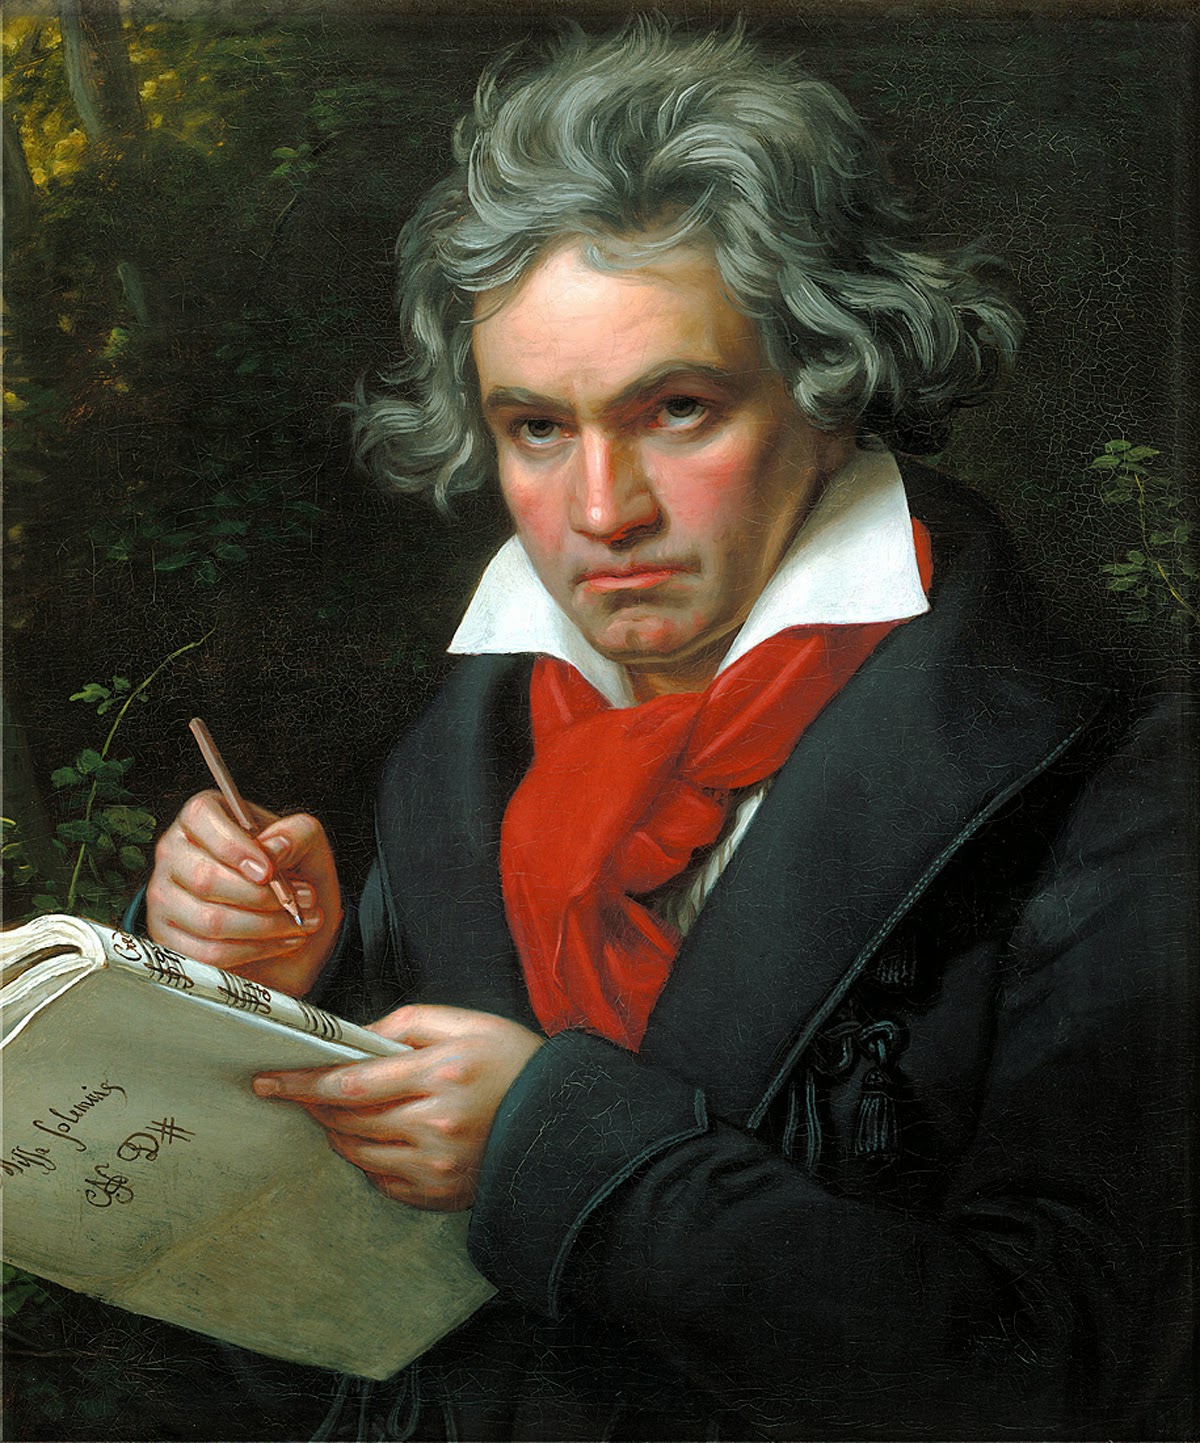 The 15 Greatest Classical Composers Of All Time - Ludwig van Beethoven (1770-1827)